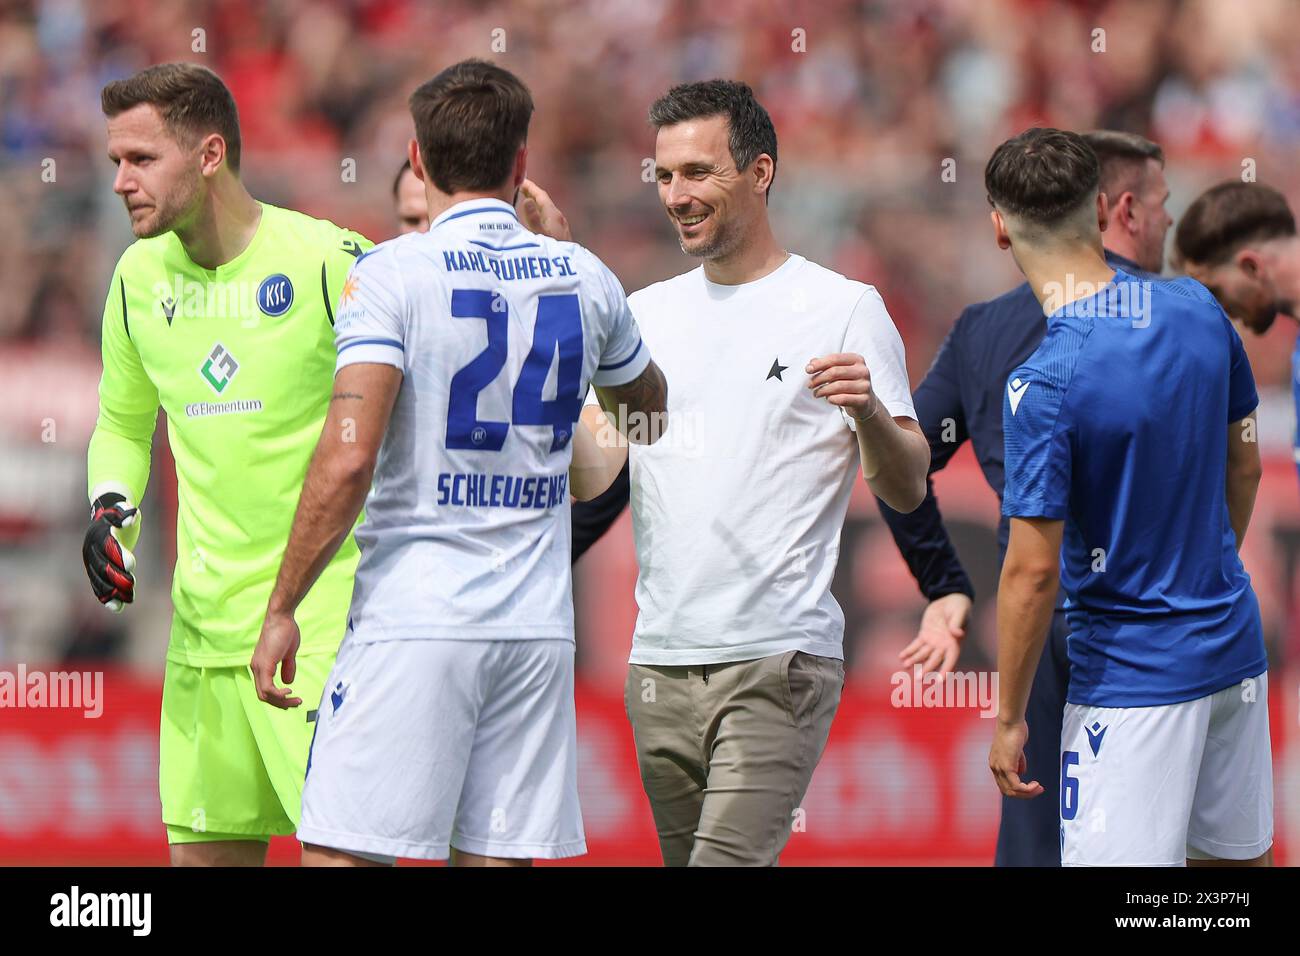 Nuremberg, Germany. 28th Apr, 2024. Soccer: Bundesliga 2, 1. FC Nürnberg - Karlsruher SC, matchday 31, Max-Morlock-Stadion. Karlsruhe coach Christian Eichner (M) celebrates the 1:0 victory with Fabian Schleusener (2nd from left). Credit: Daniel Löb/dpa - IMPORTANT NOTE: In accordance with the regulations of the DFL German Football League and the DFB German Football Association, it is prohibited to utilize or have utilized photographs taken in the stadium and/or of the match in the form of sequential images and/or video-like photo series./dpa/Alamy Live News Stock Photo